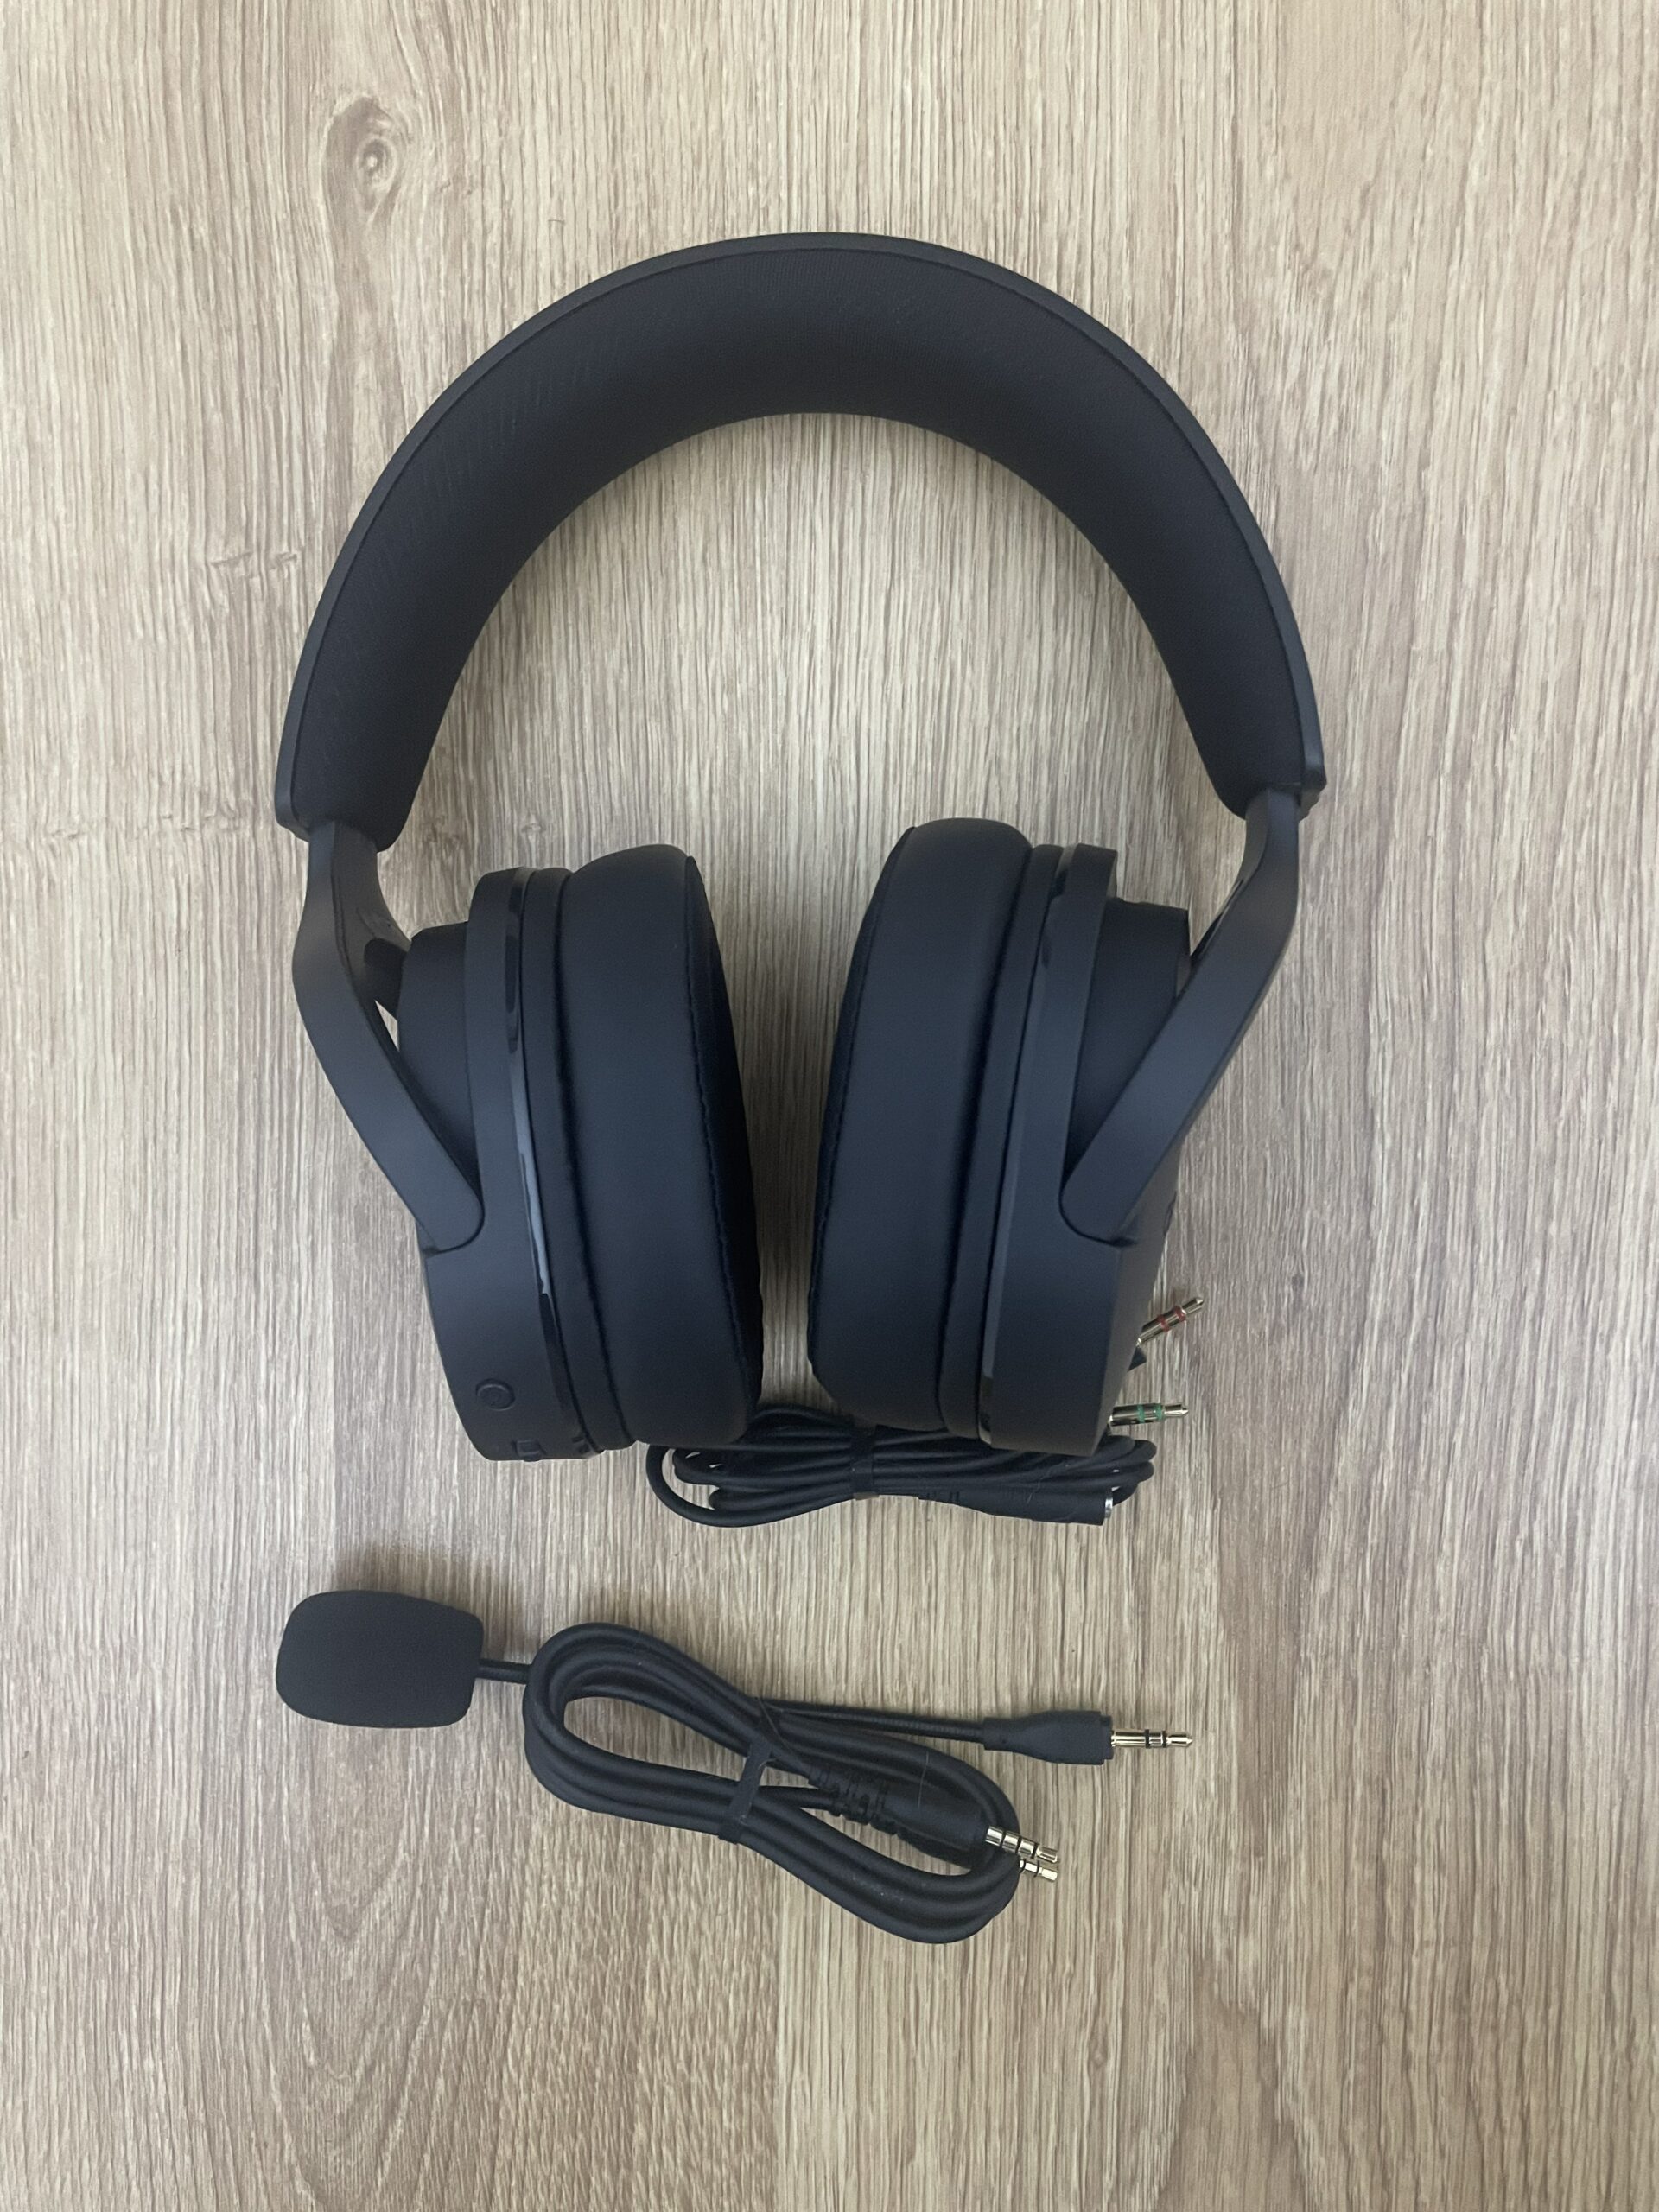 Casque Gaming avec Microphone Trust Gaming GXT 415 Zirox Nintendo Switch/  Jack 3.5/ Rouge